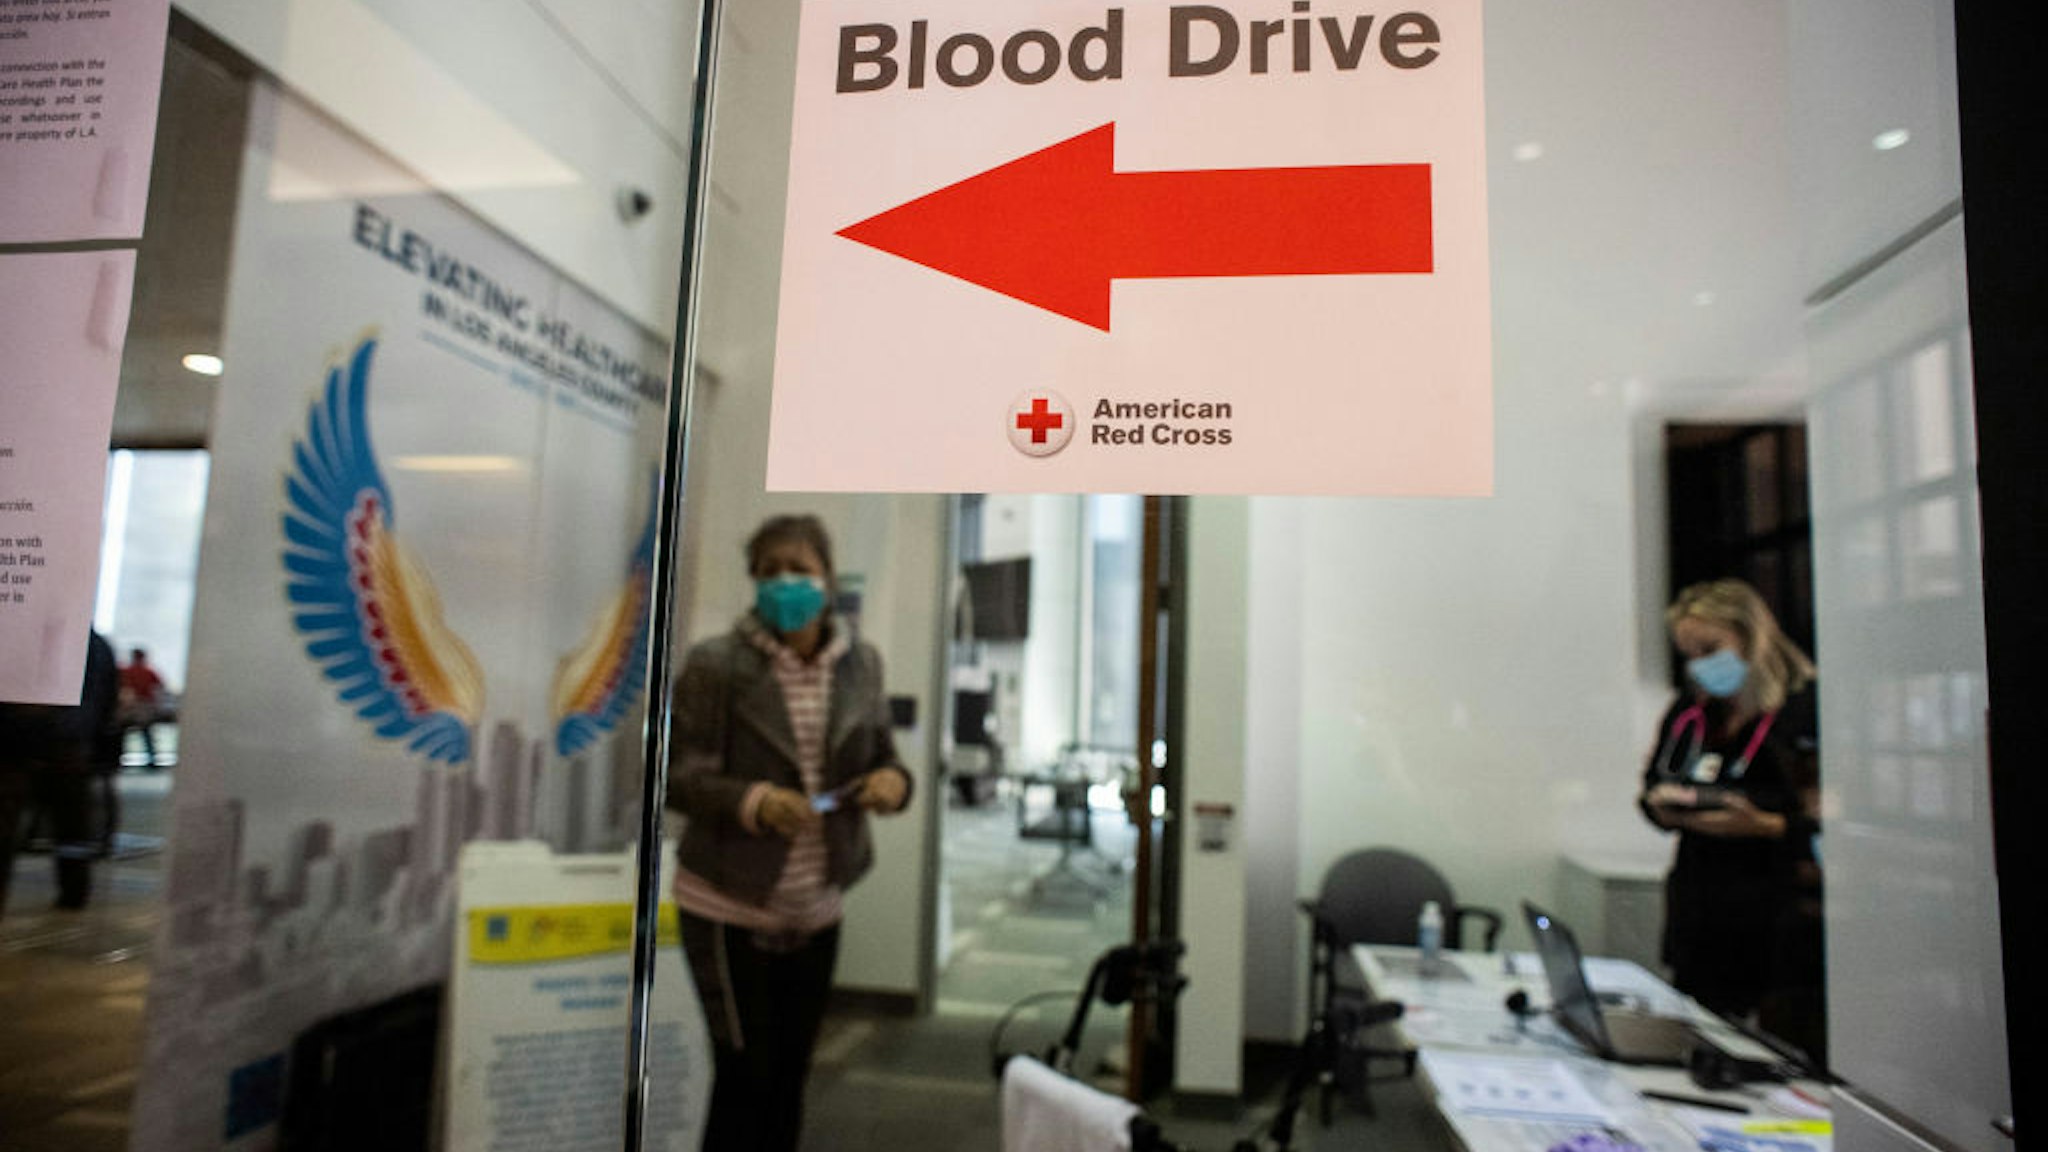 LOS ANGELES, CA - MARCH 23: The Red Cross and L.A. Care Health Plan hold a blood drive in Los Angeles on Tuesday, March 23, 2021. The Red Cross is experiencing a shortage of blood donations during the pandemic as blood drives have been canceled. (Photo by Sarah Reingewirtz, Los Angeles Daily News/SCNG)